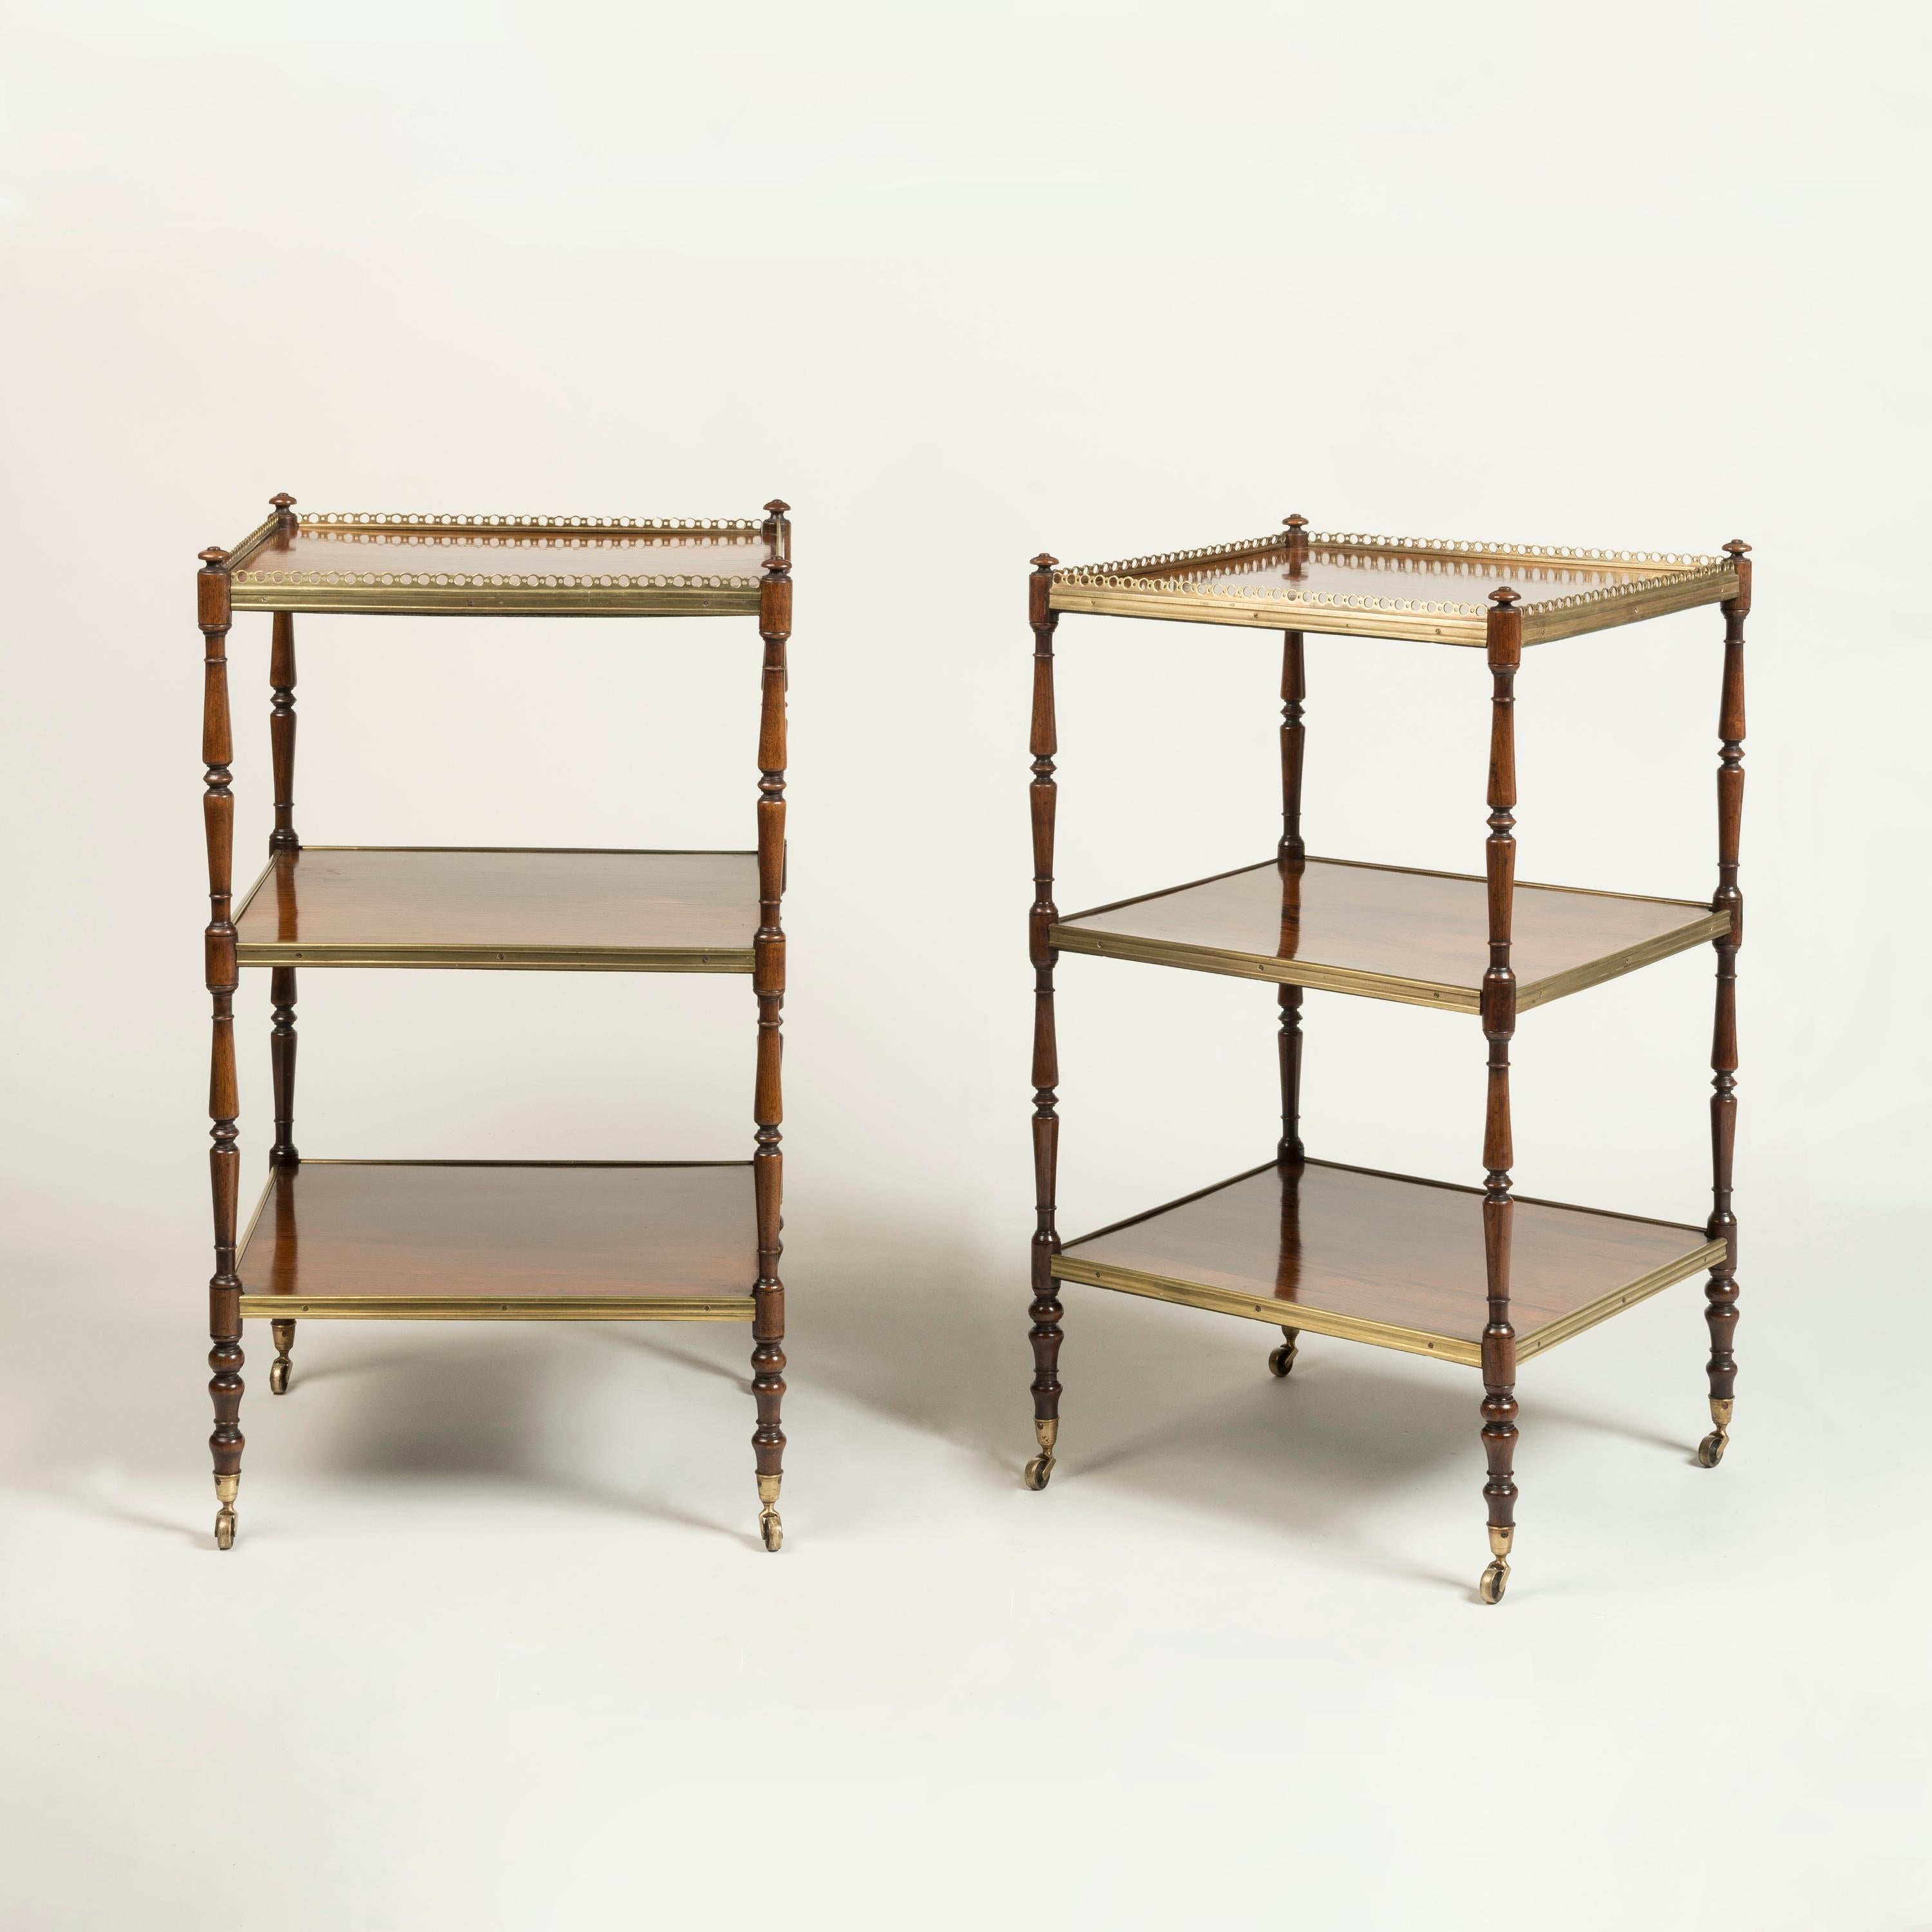 A Fine Pair of Regency Period Rosewood Étagères

Of elegant proportions, with carved tapering and ring-turned rosewood supports, standing on brass castors, each of the three shelves with a handsome grained rosewood; the top with a pierced brass